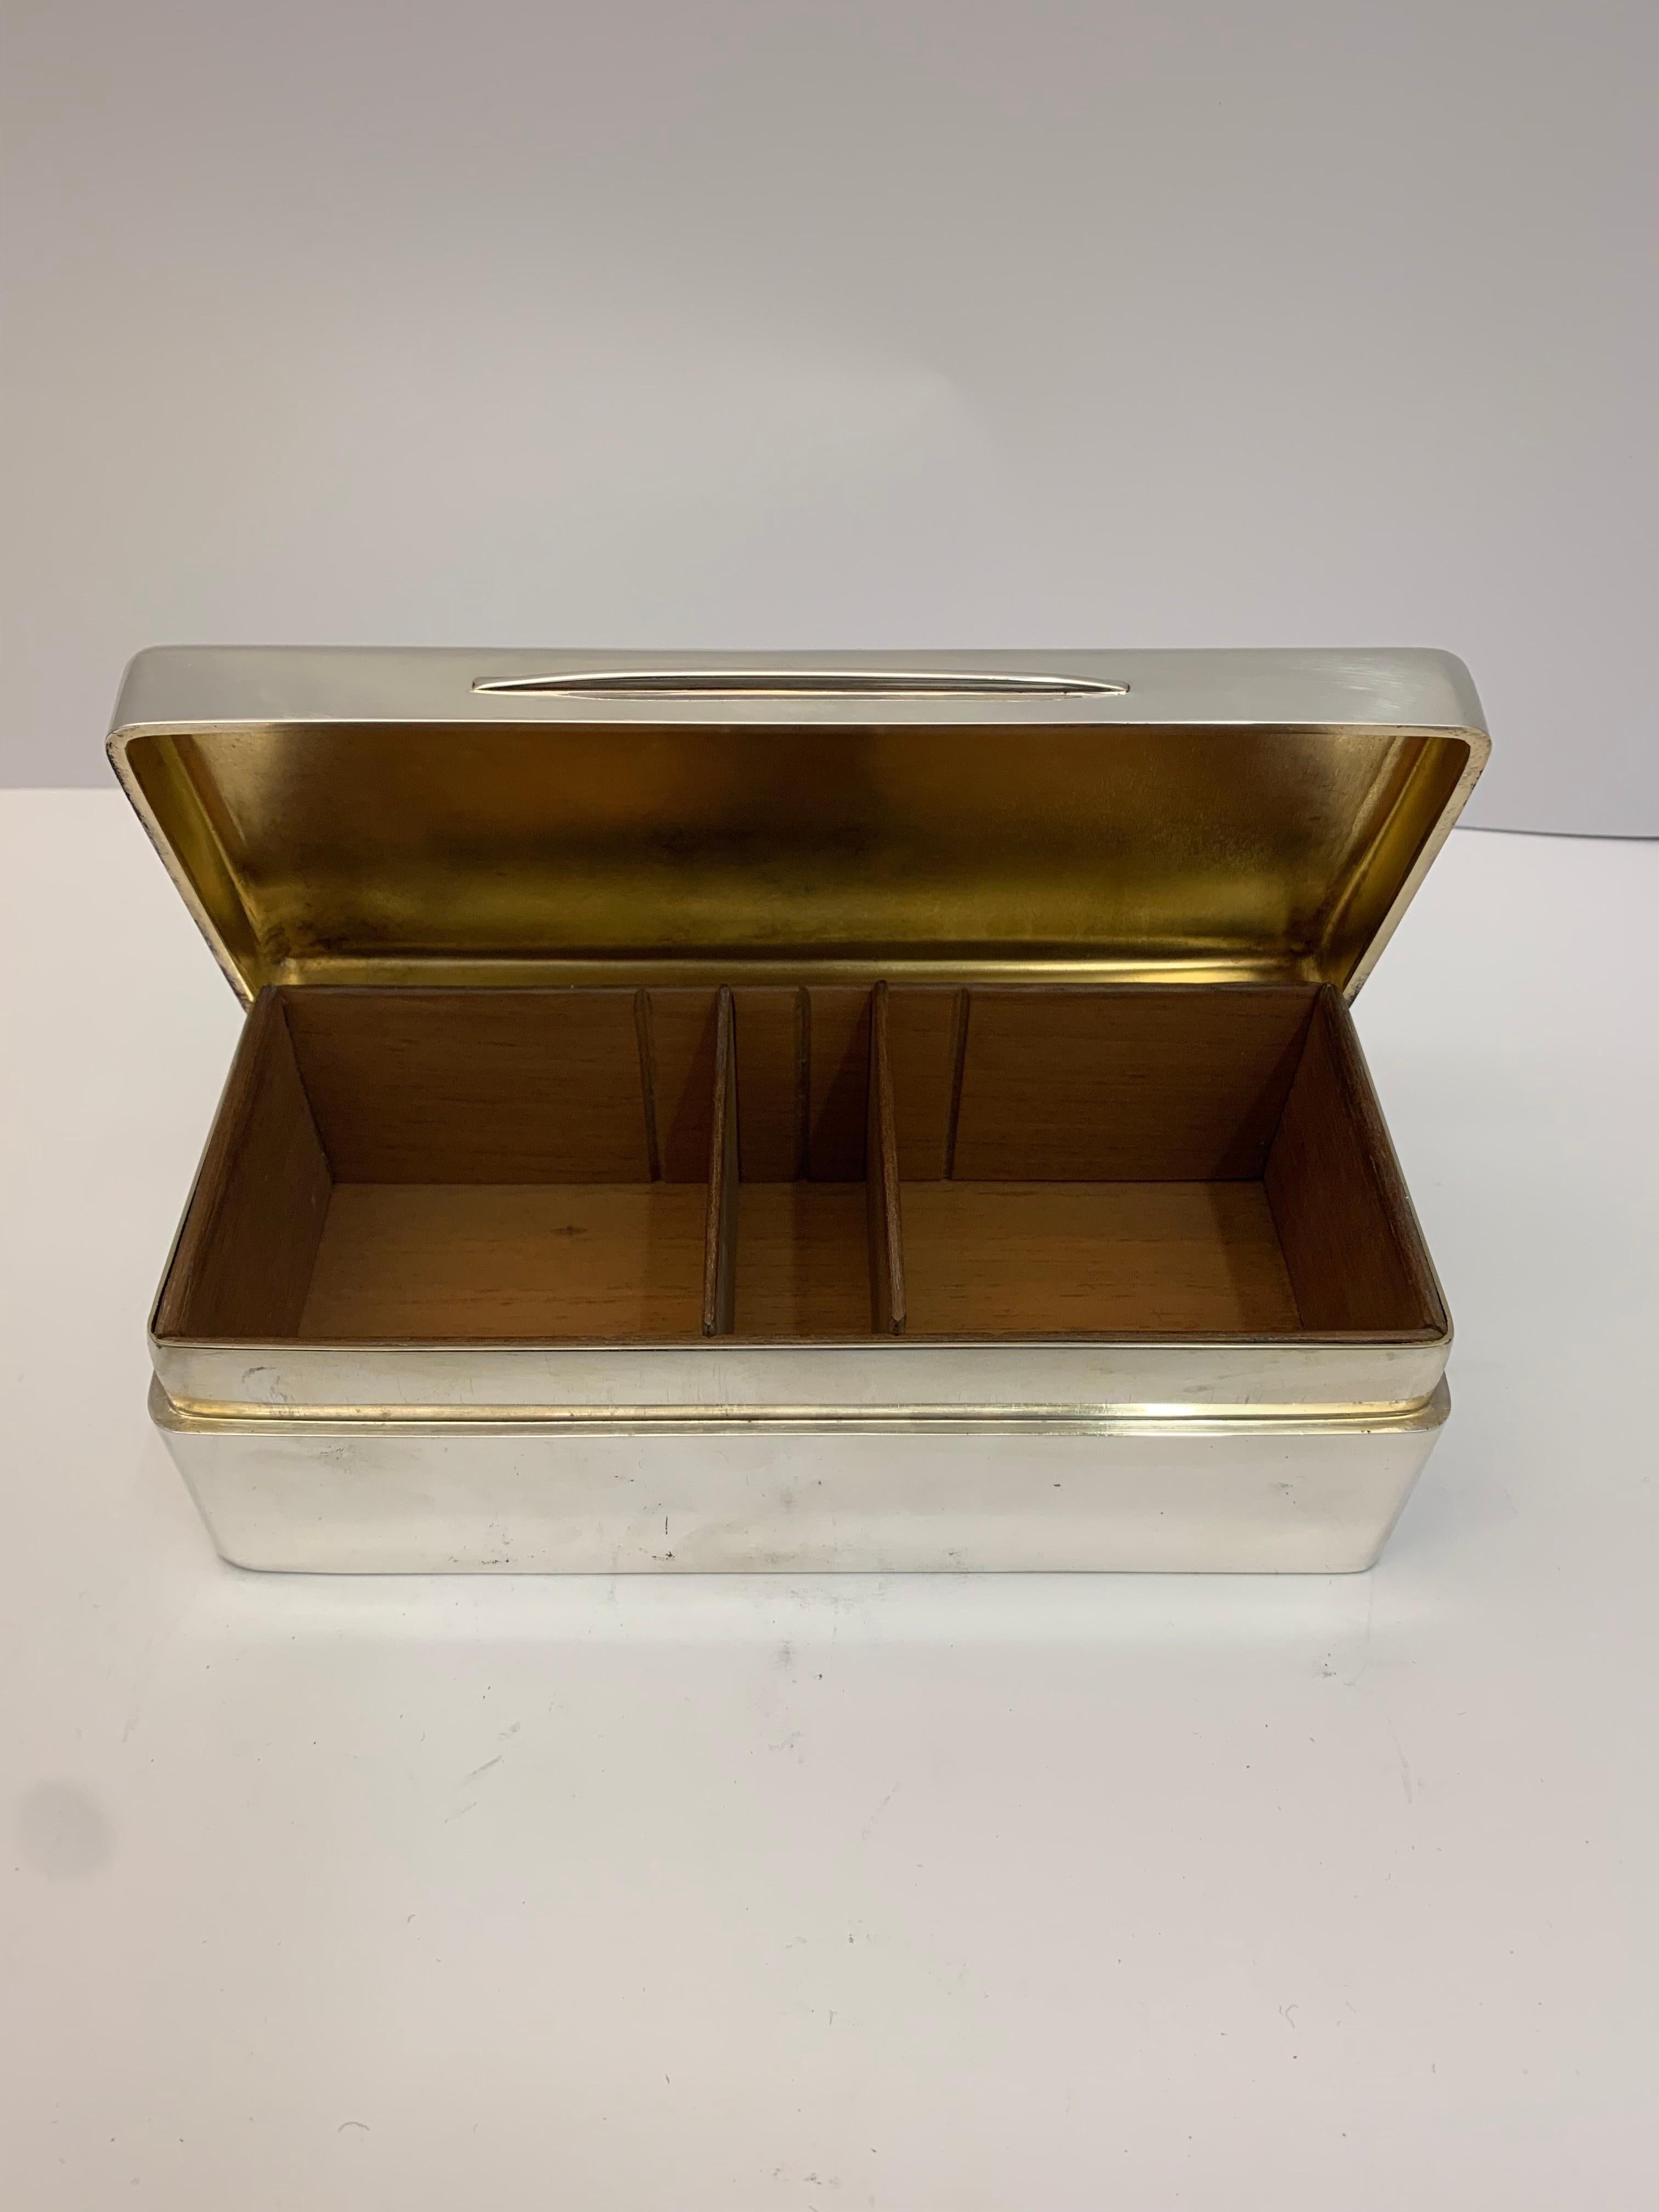 Victorian rectangular antique silver box with wooden compartments and hinged lid. Made in London by Gibson and Langman.